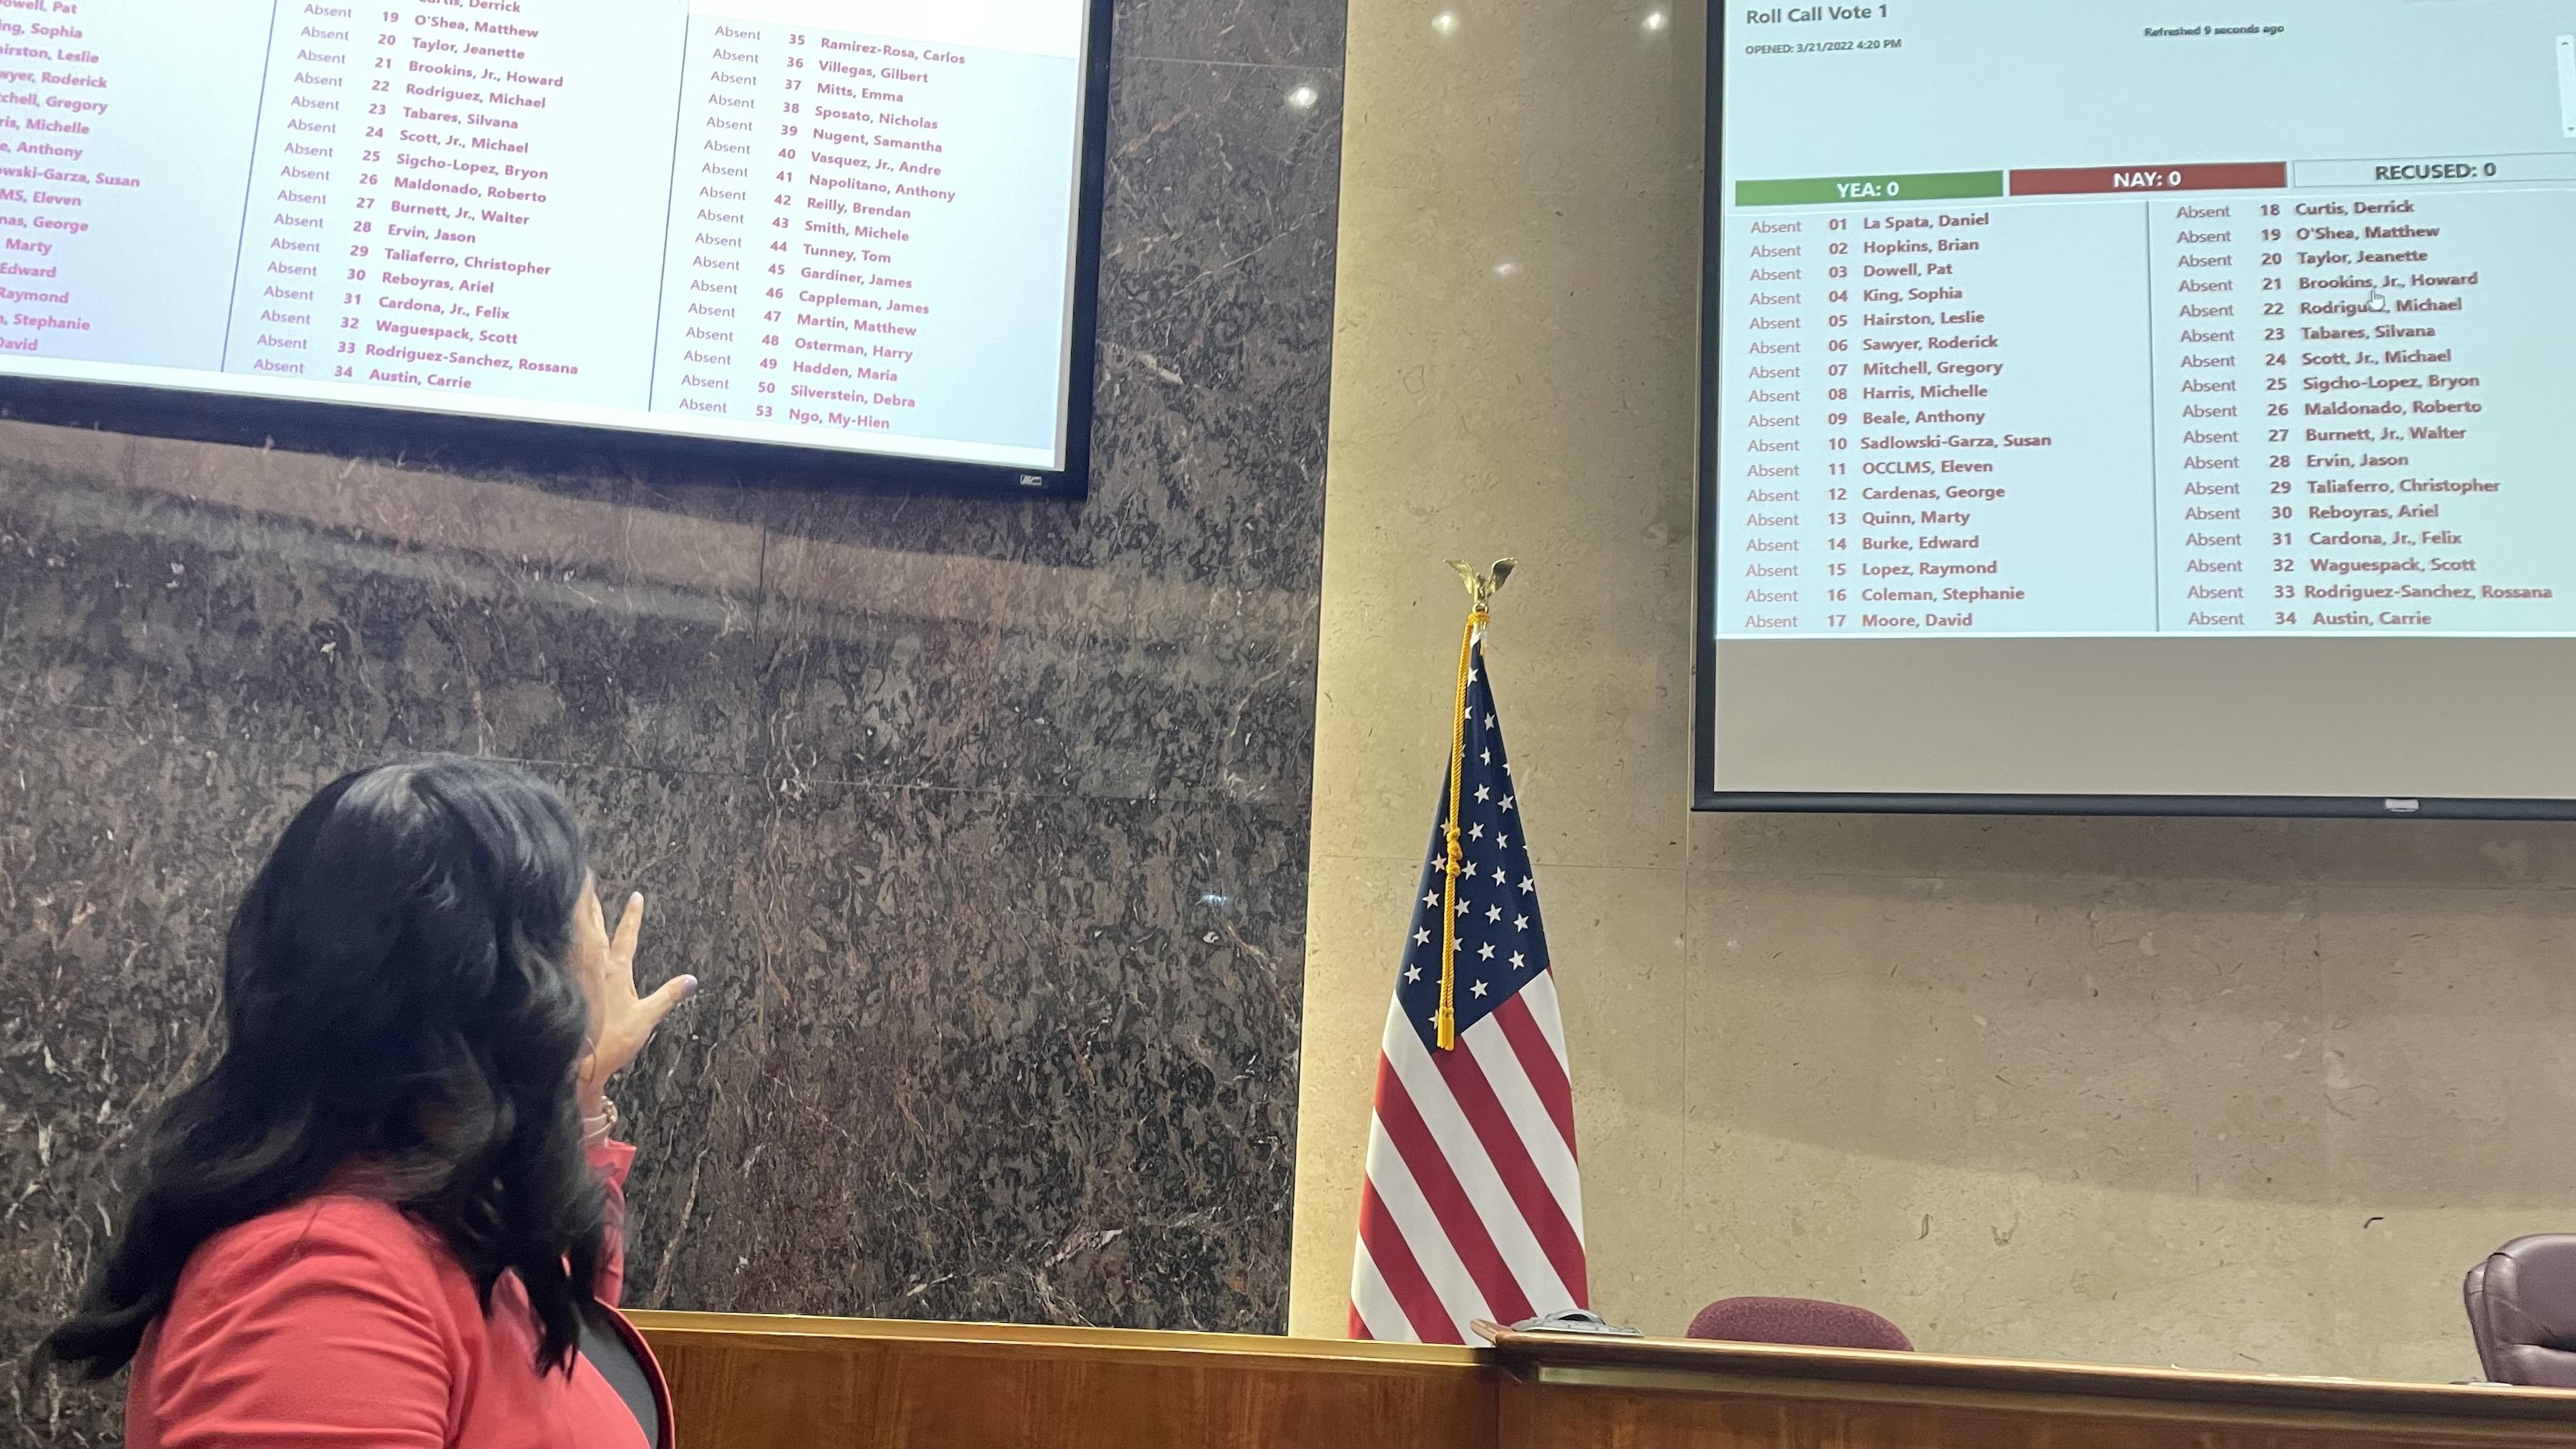 City Clerk Anna Valencia discusses the new digital screens that will display votes by members of the Chicago City Council on Monday, March 21. (WTTW News/Heather Cherone)